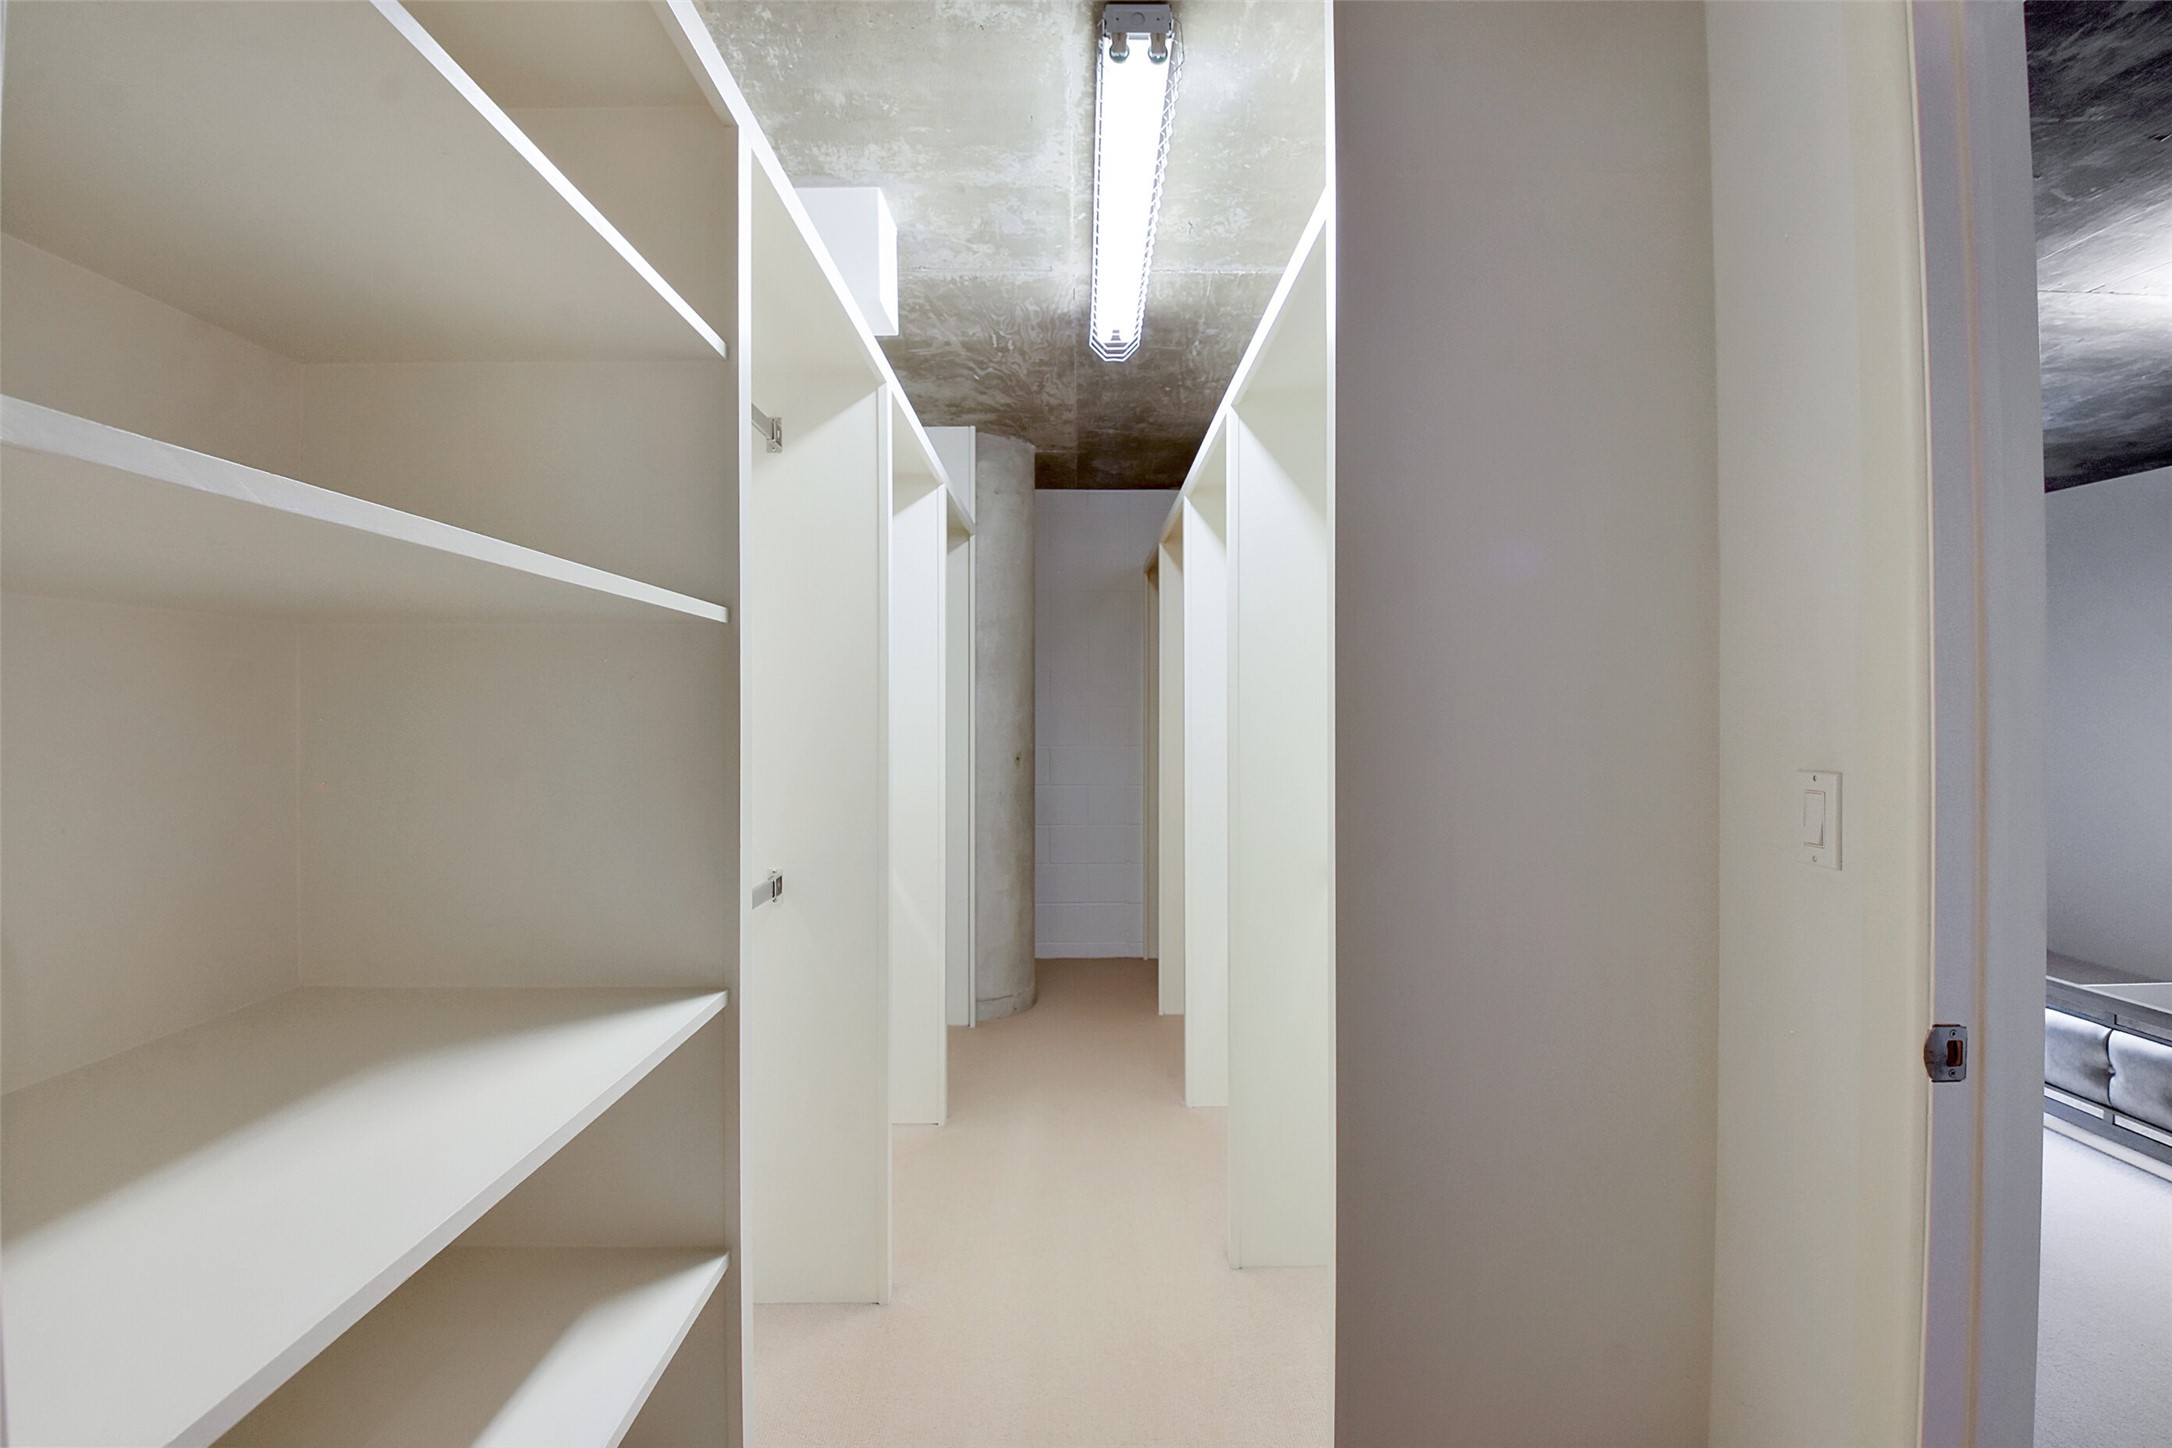 THIS ENORMOUS WALK-IN CLOSET INCLUDES DOUBLE RAILS AND PLENTY OF STORAGE SPACE.